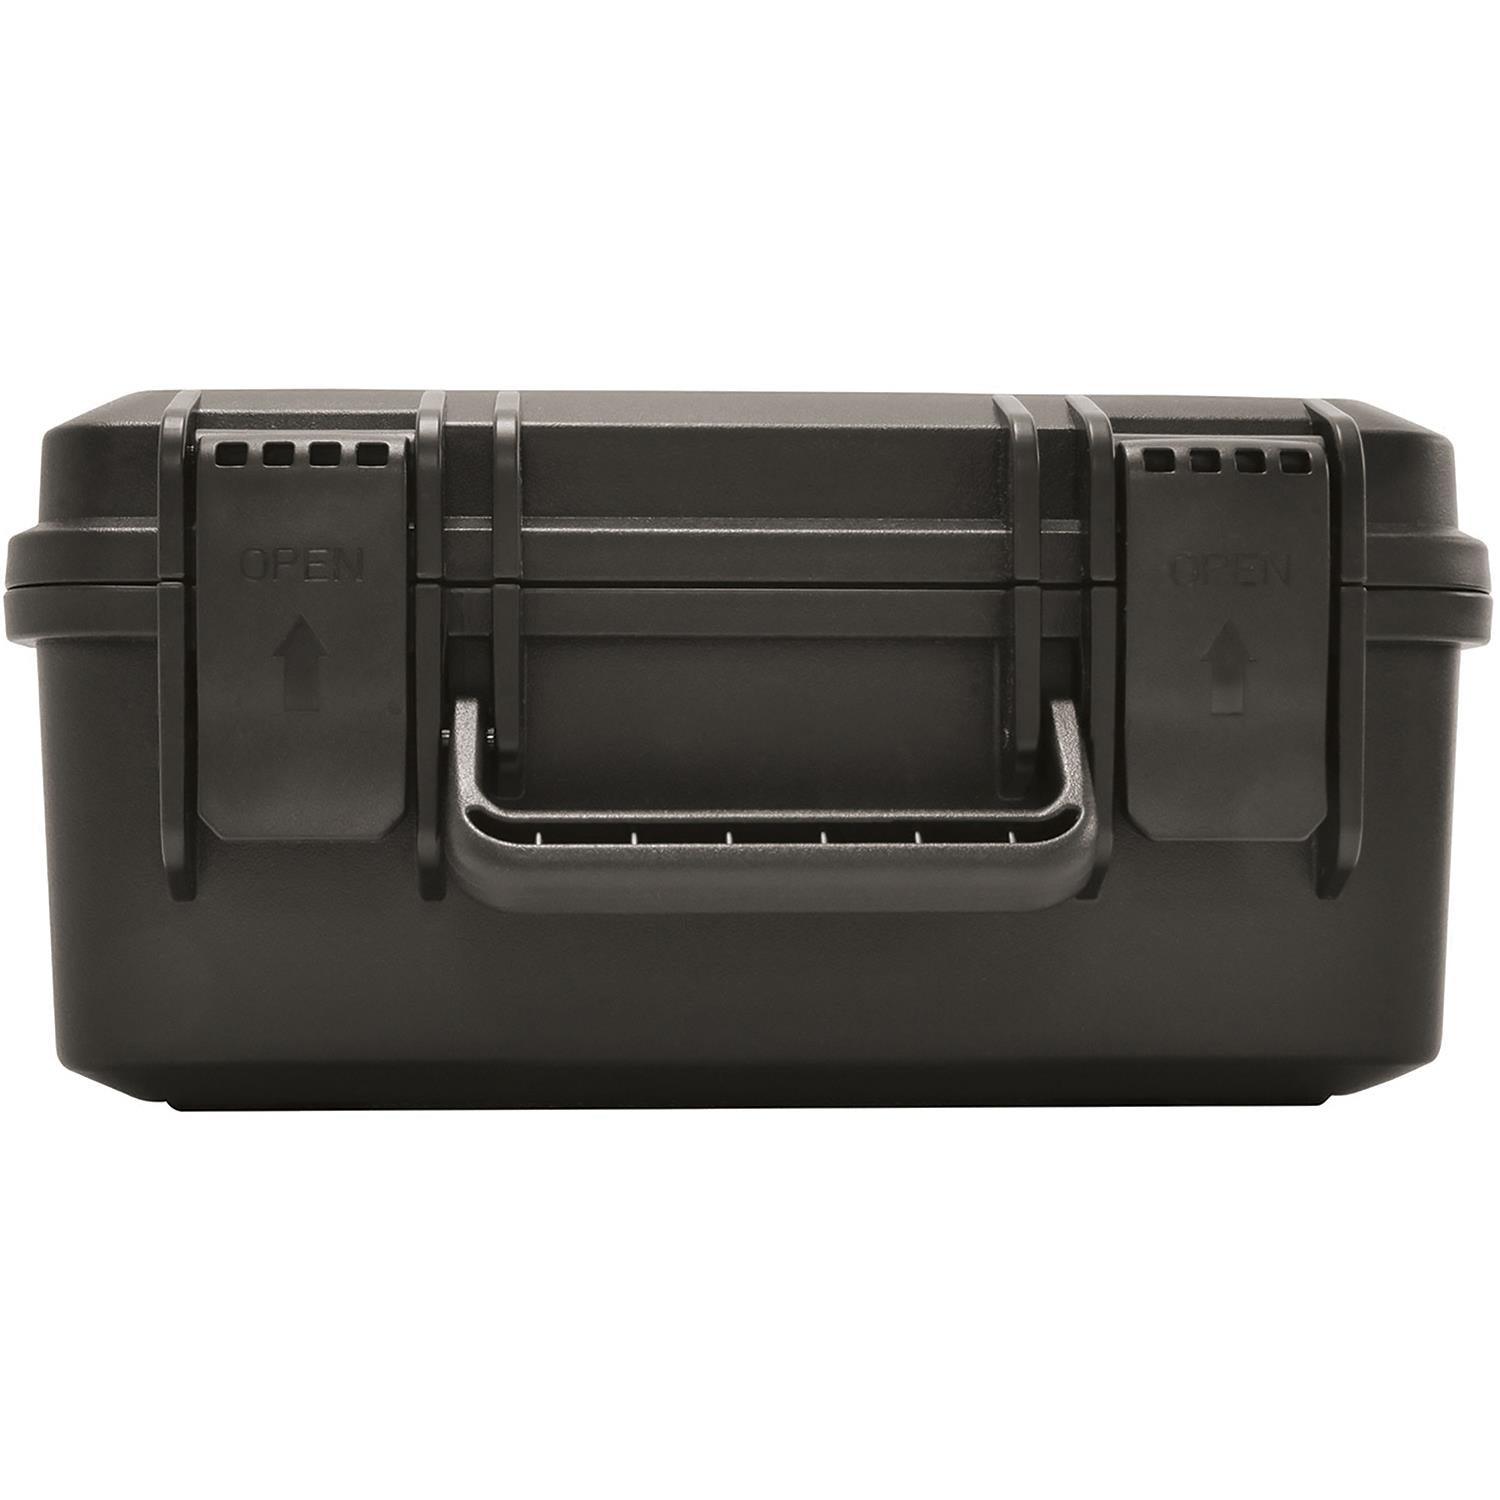 Citronic Heavy Duty Compact ABS Transit Case - DY Pro Audio